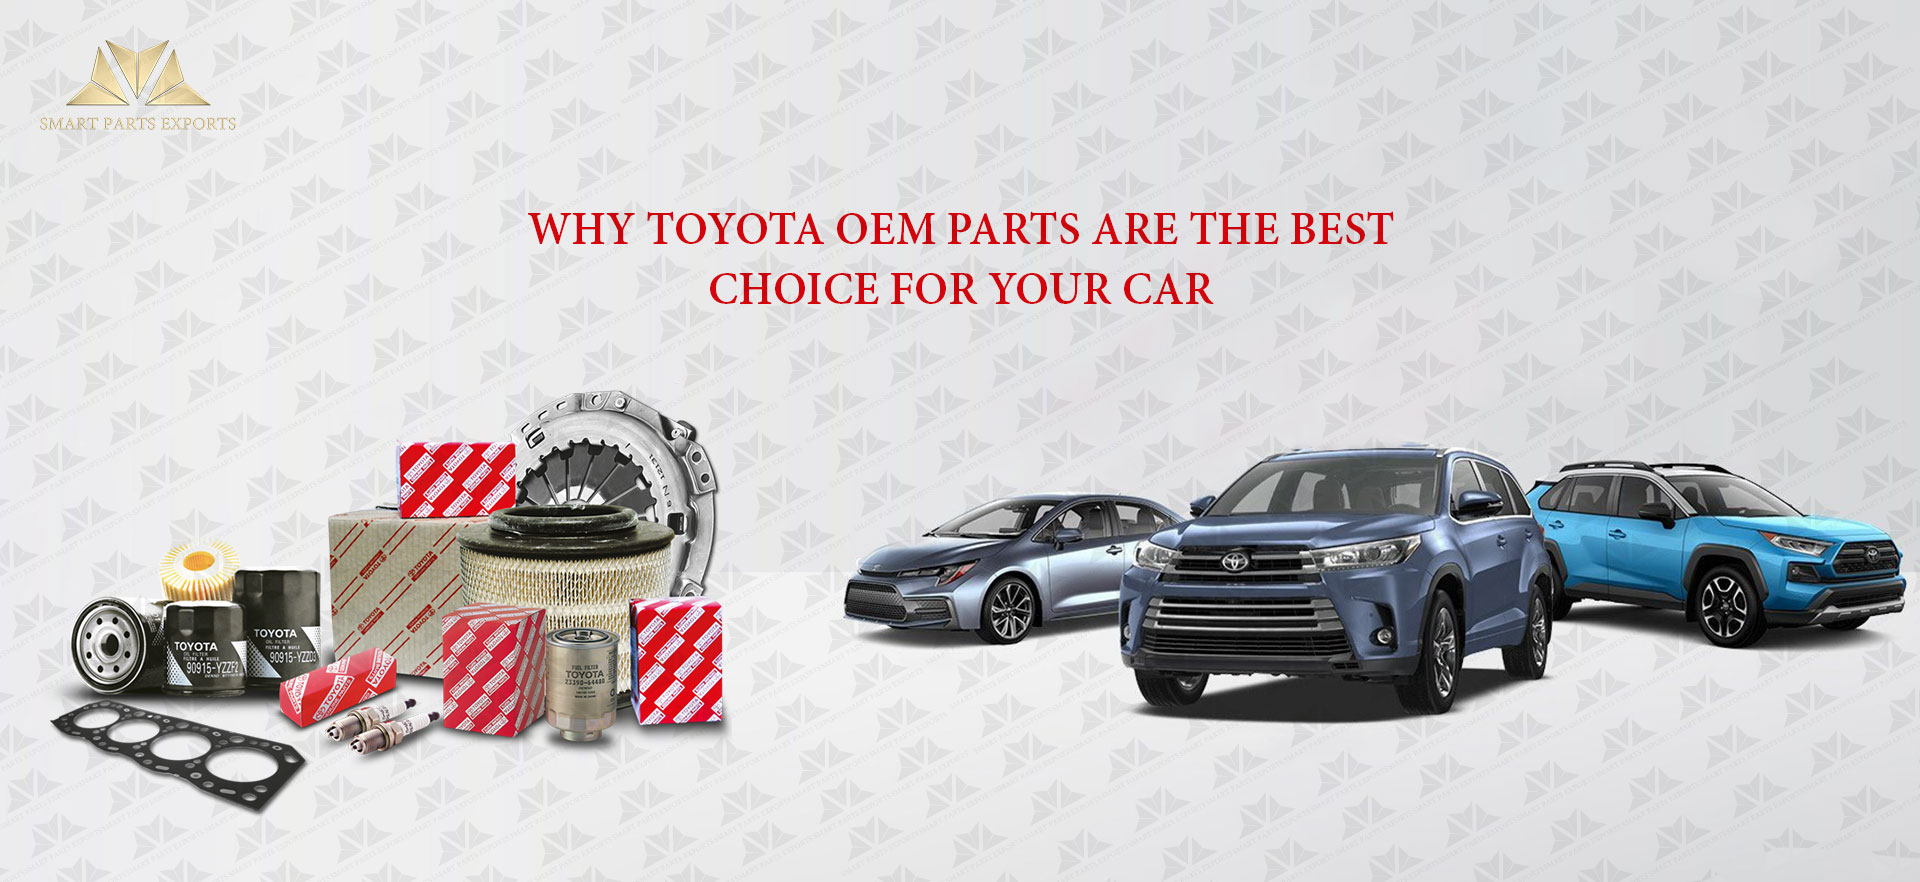 Why Toyota OEM Parts are the Best Choice for Your Car